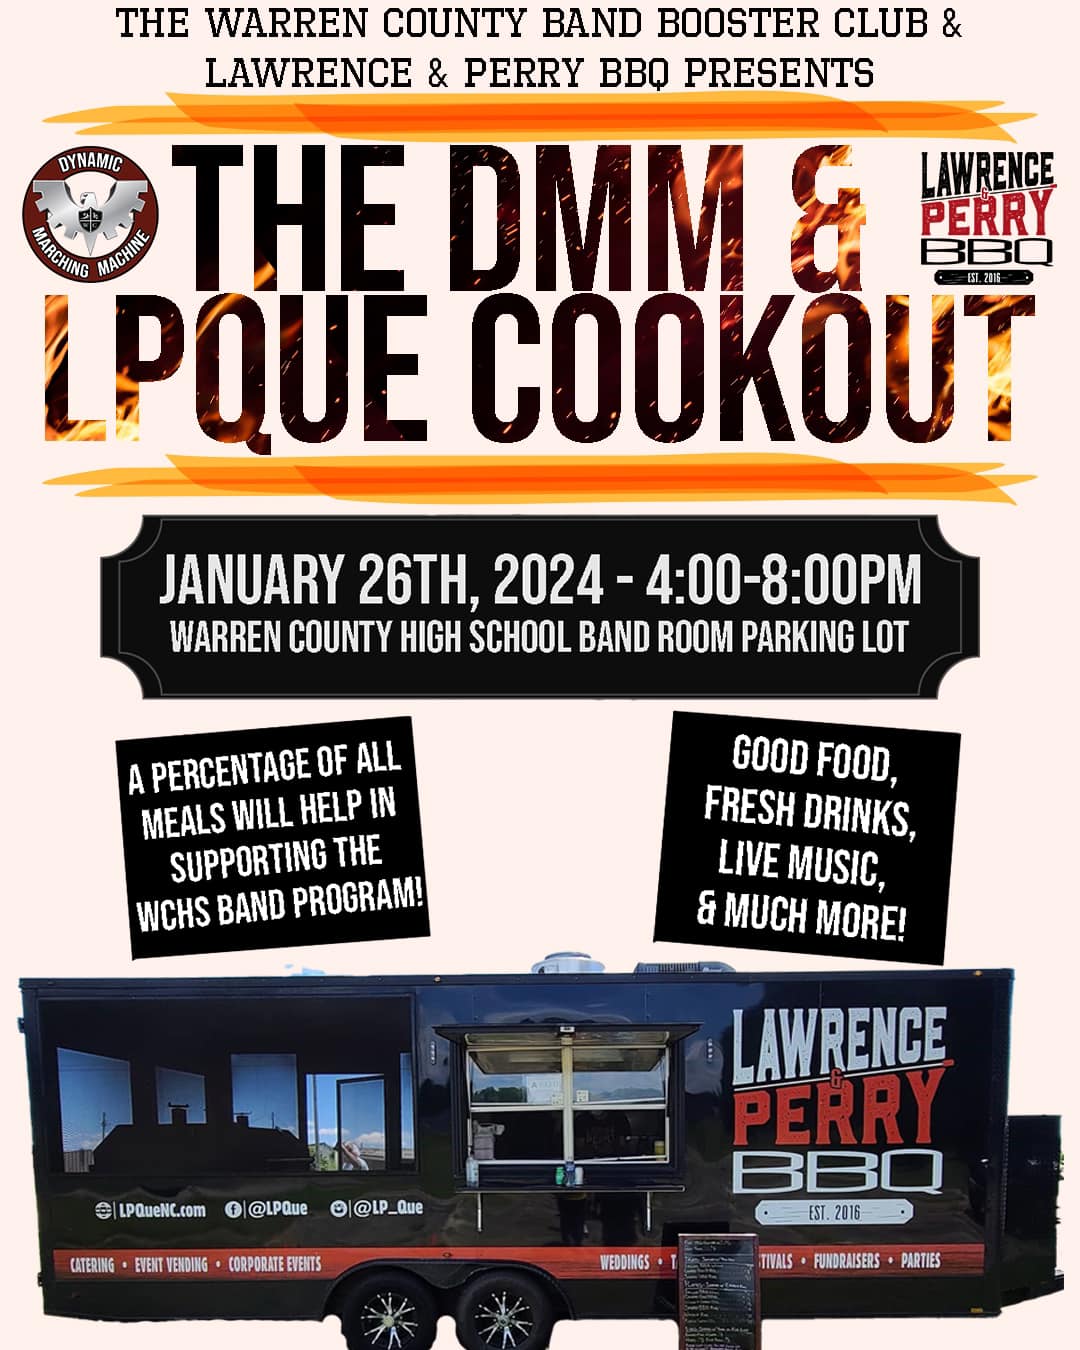 warren county band booster club lawrence and perry bbq fundraiser january 26 2024